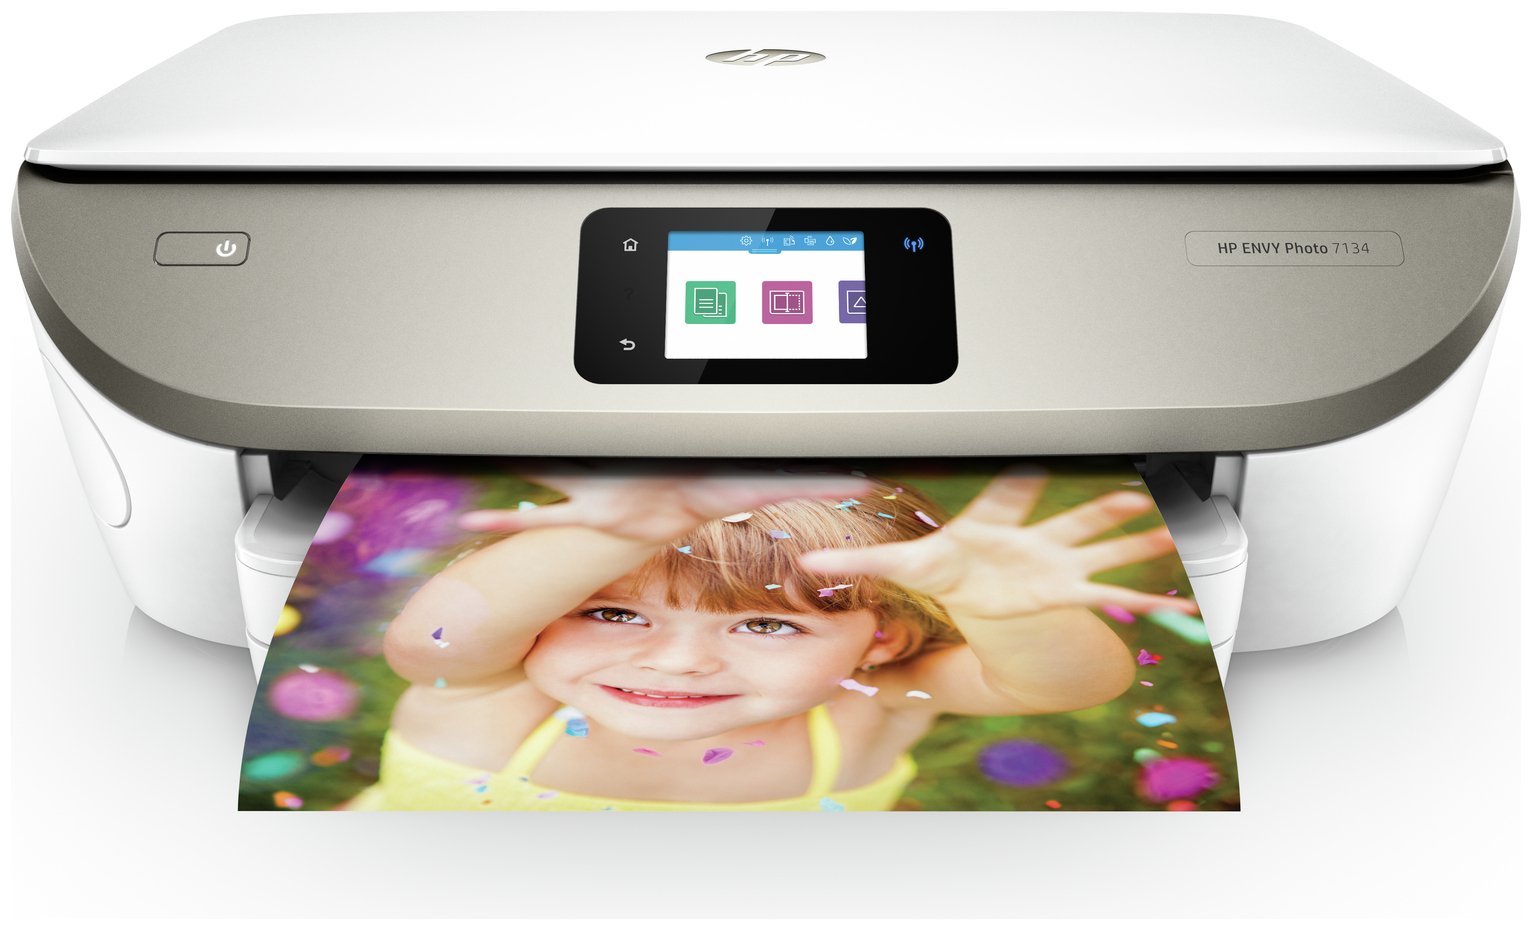 HP Envy 7134 Wireless Photo Printer & 5 Months Instant Ink